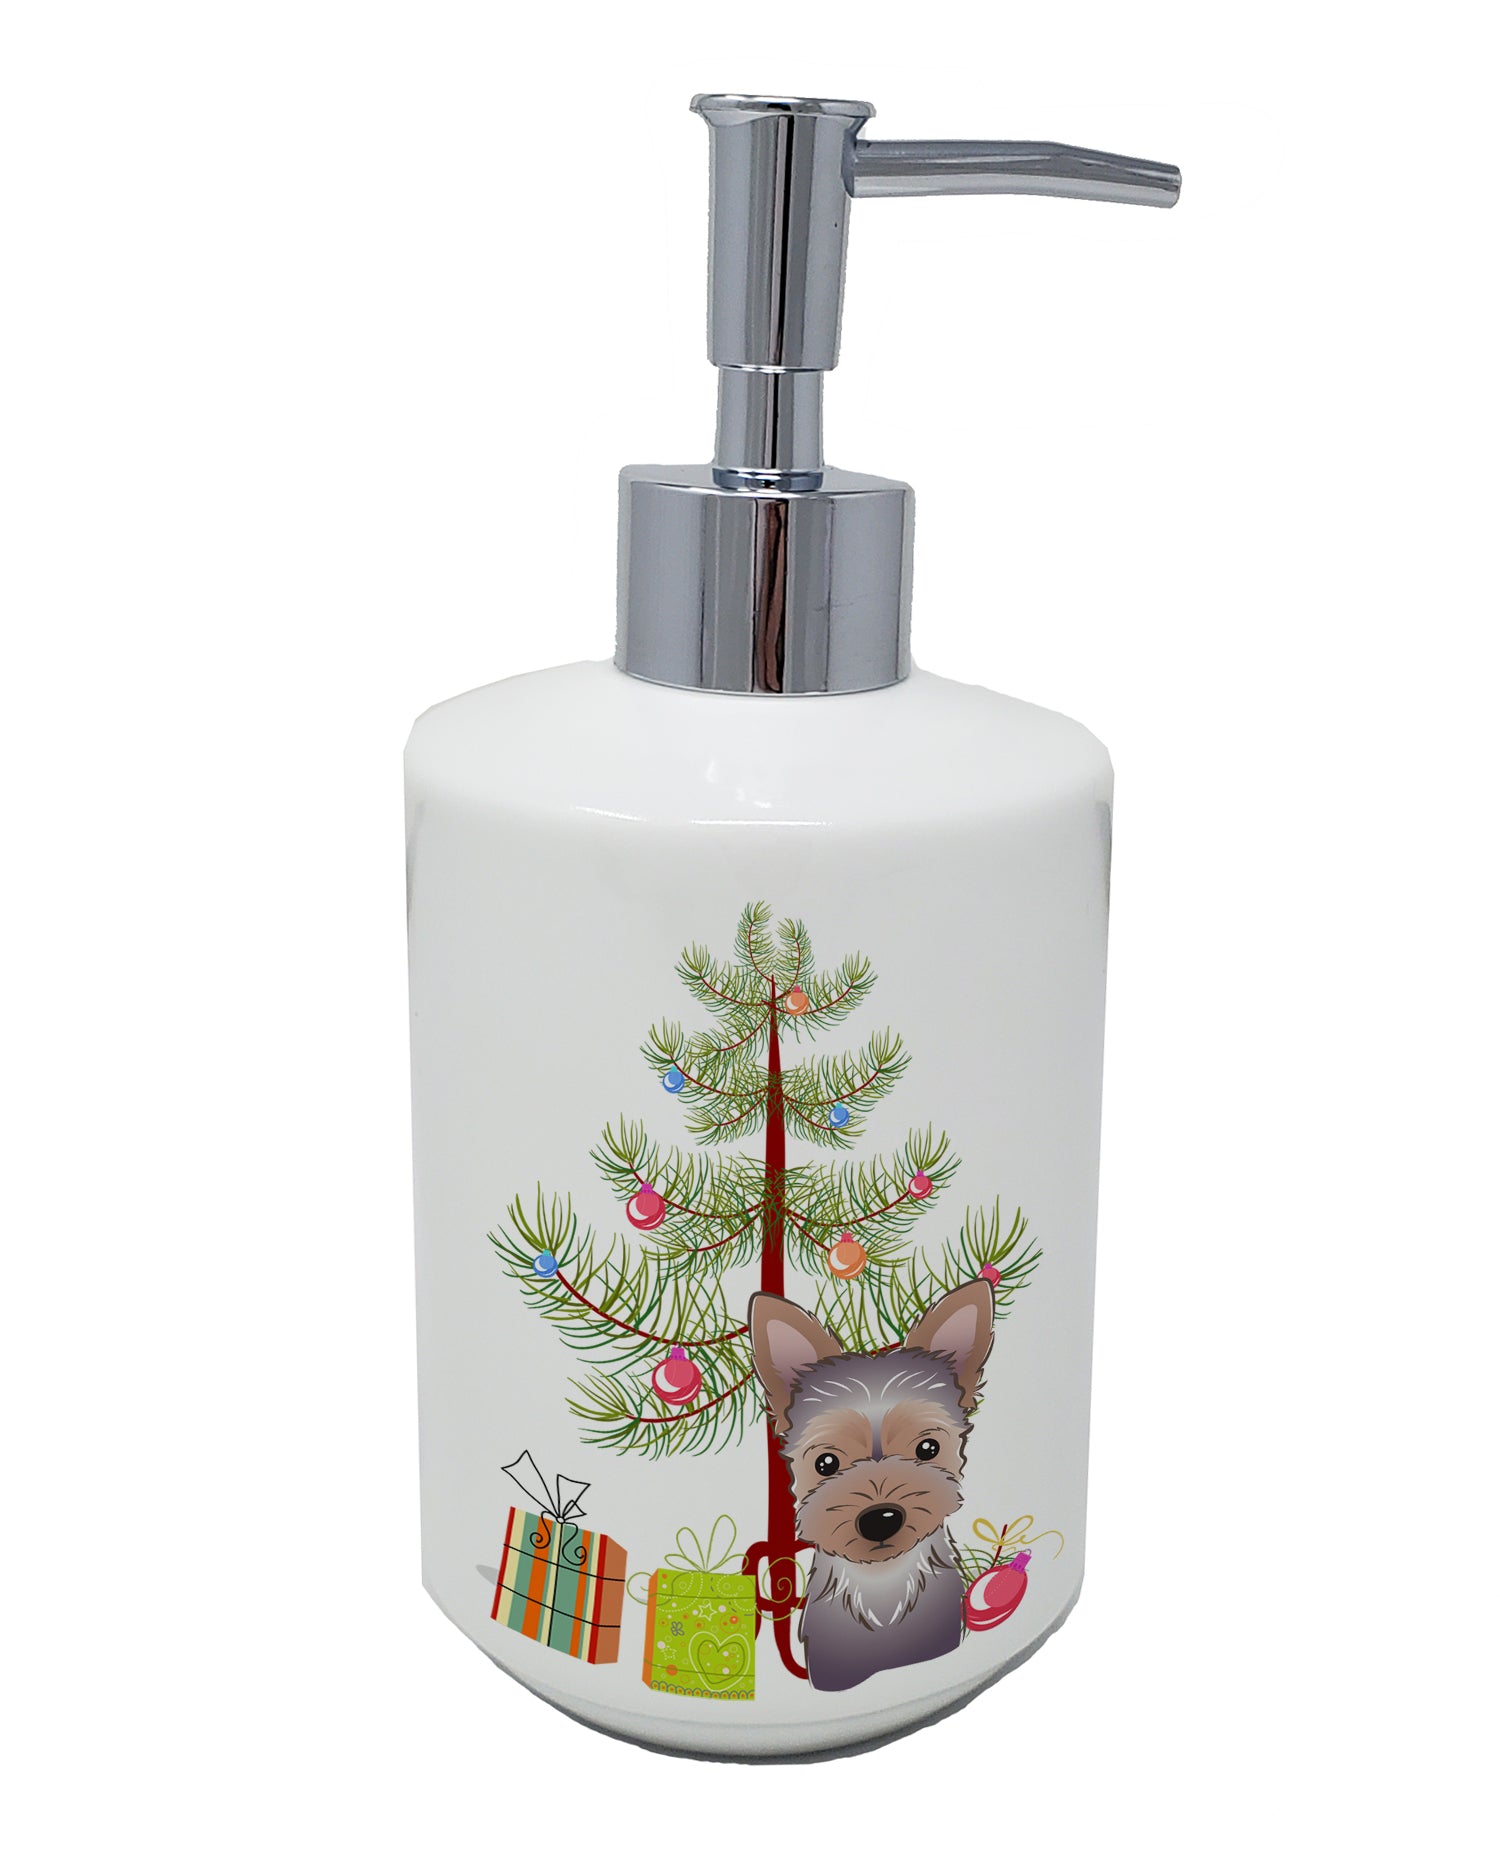 Buy this Christmas Tree and Yorkie Puppy Ceramic Soap Dispenser